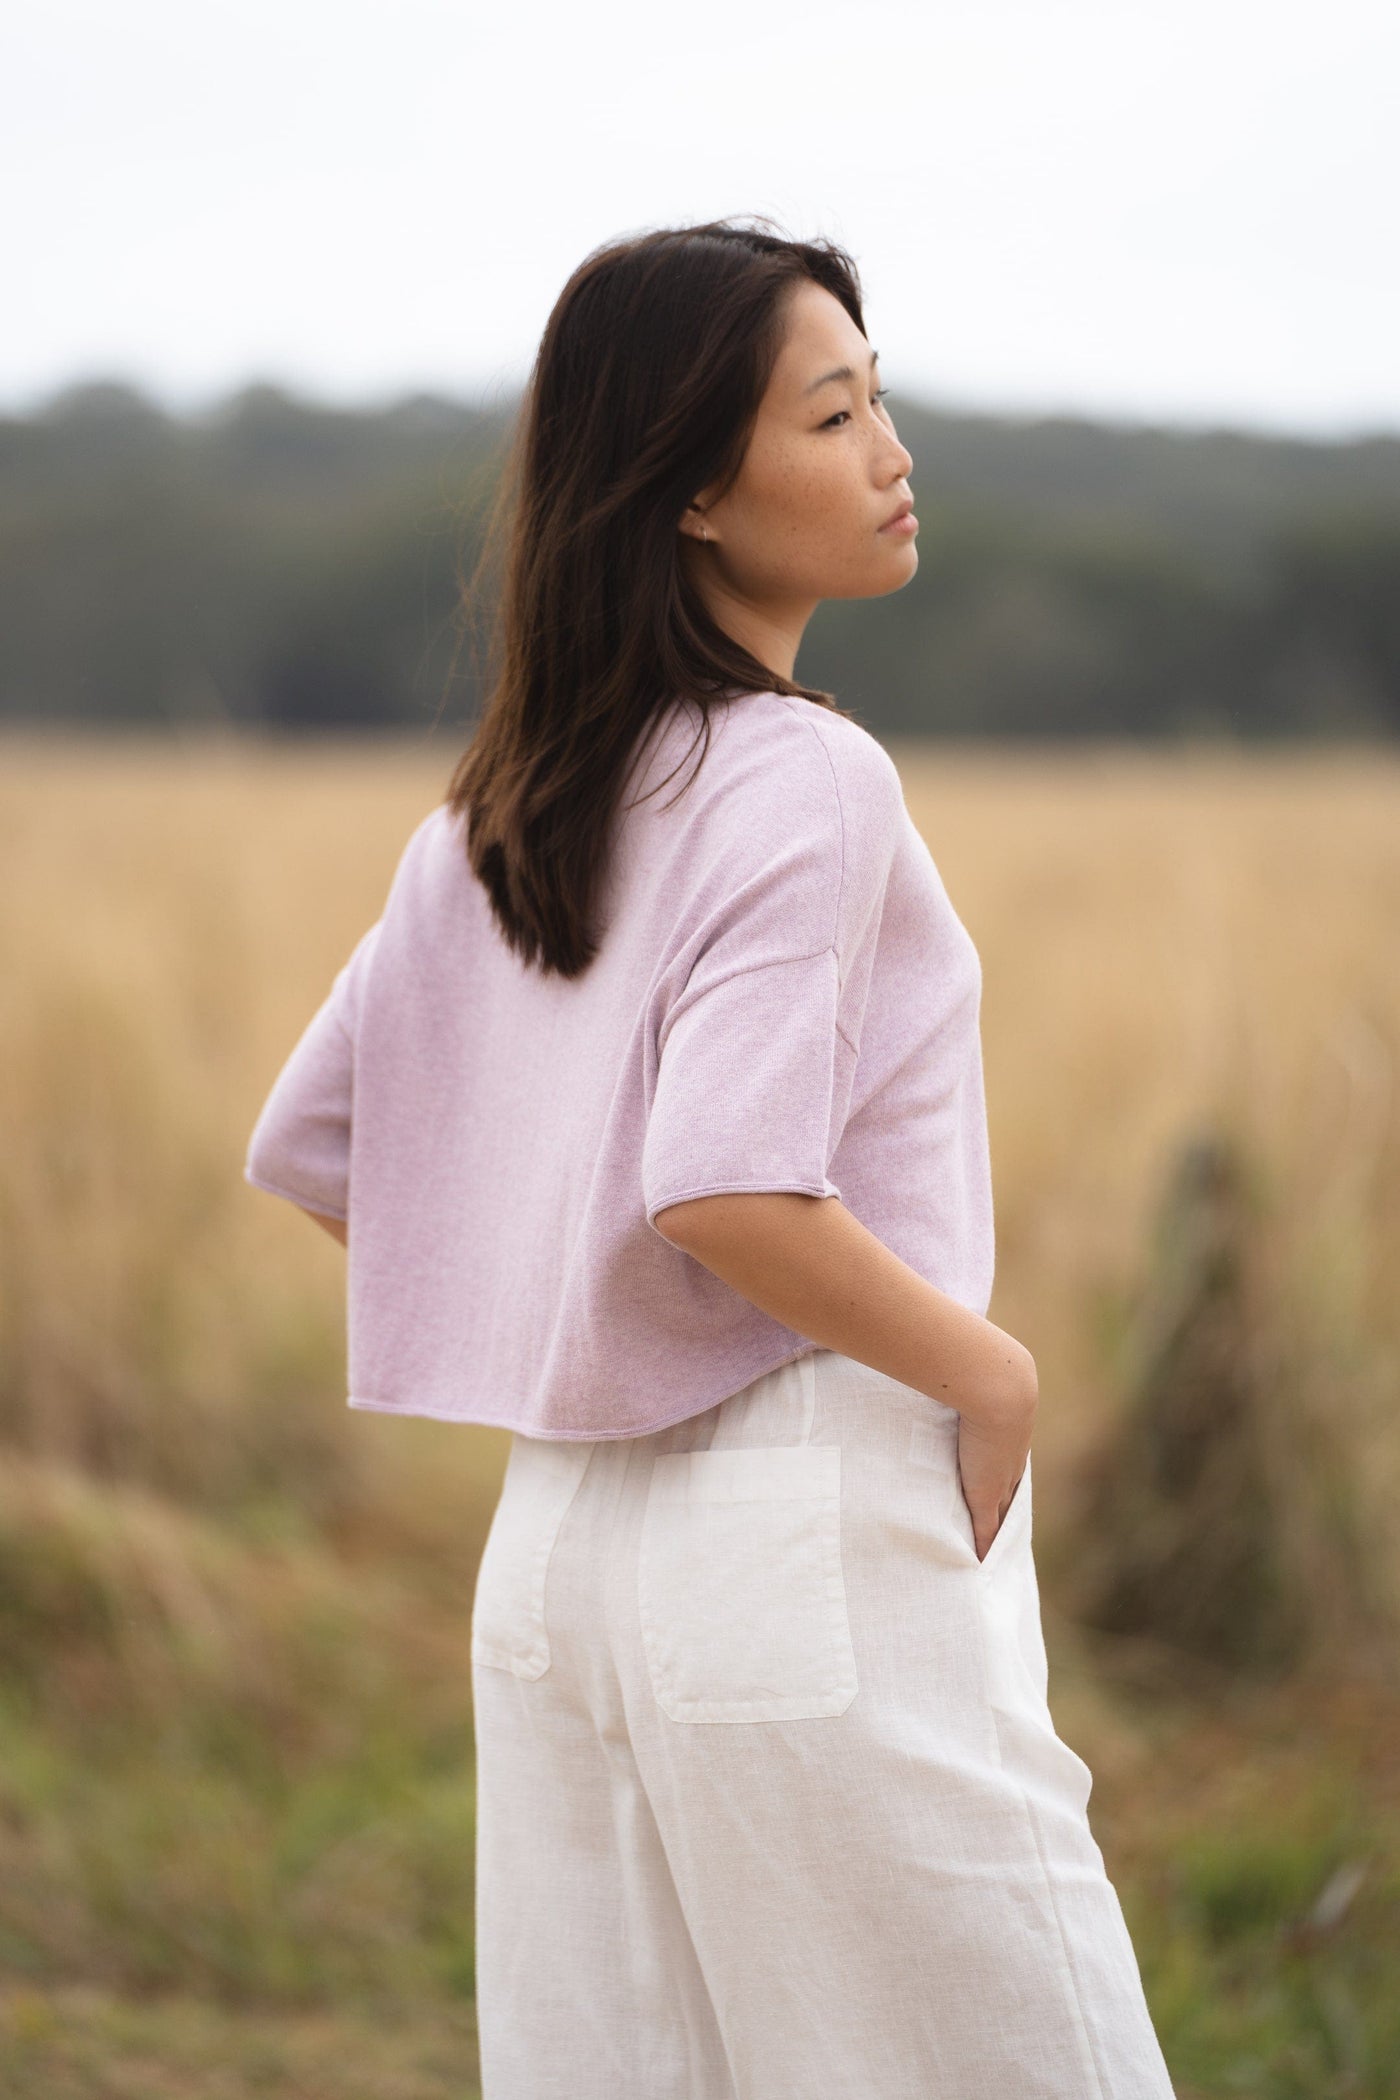 LILLY PILLY Addison Knit top made from Cotton Cashmere in Soft Lilac